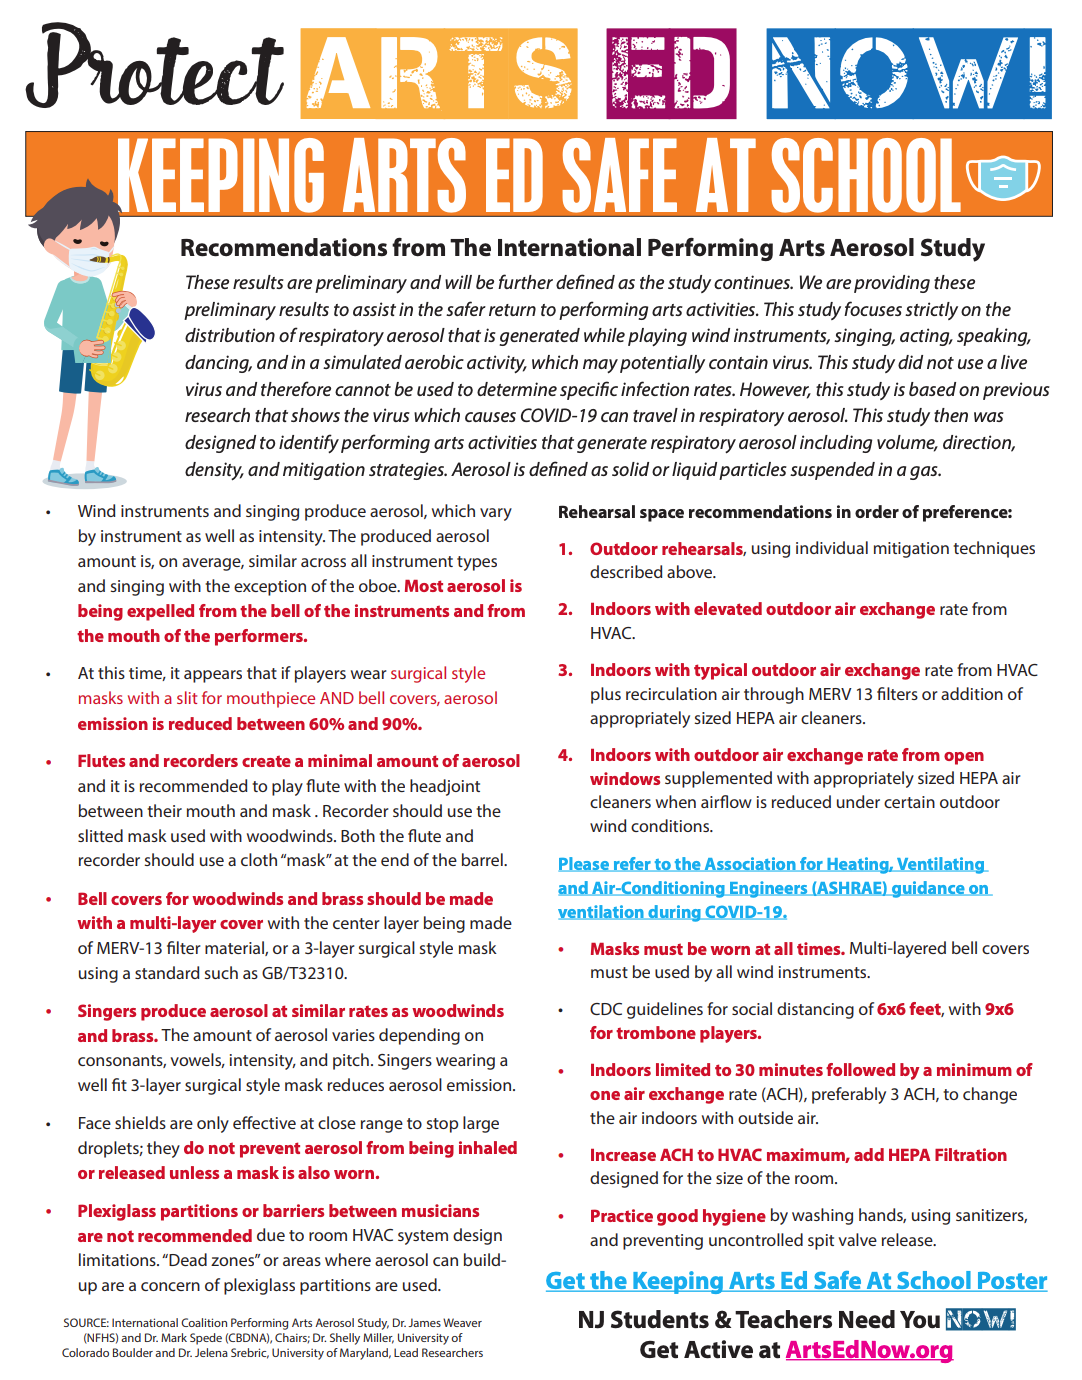 COvID Safety poster for arts ed